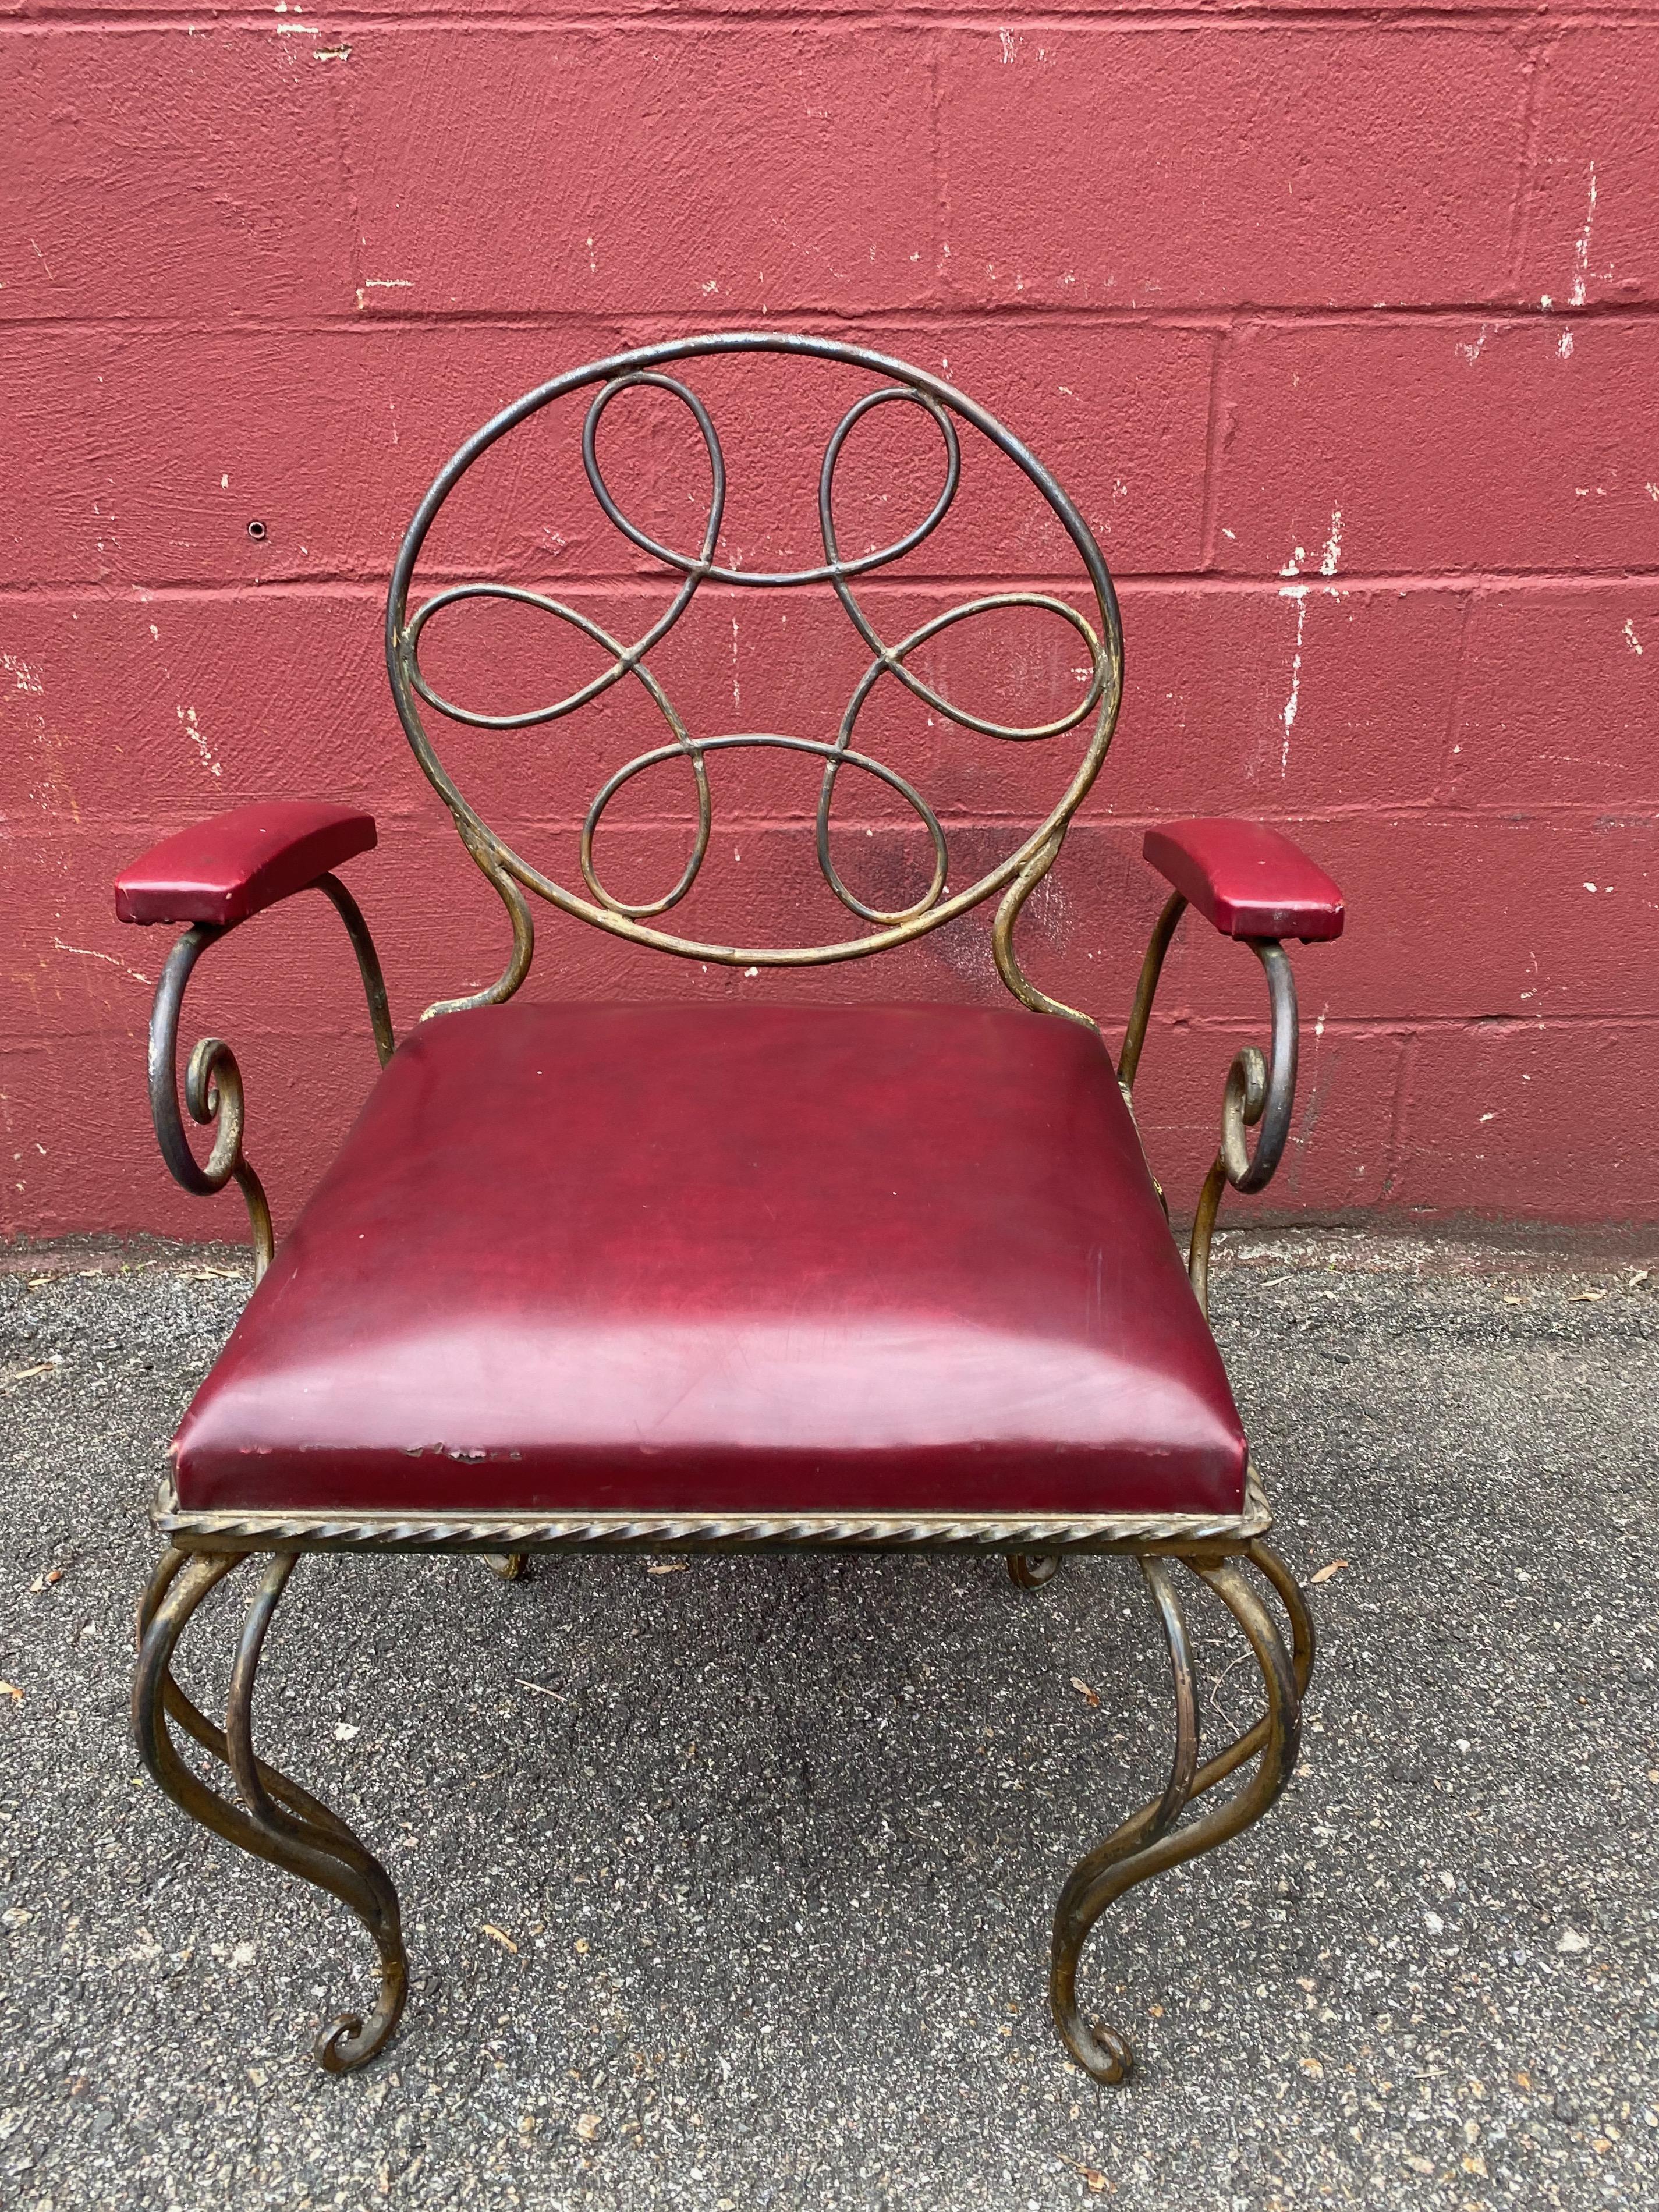 Ornate Wrought Iron Armchair in Oxblood Red Vinyl In Good Condition For Sale In Buchanan, NY